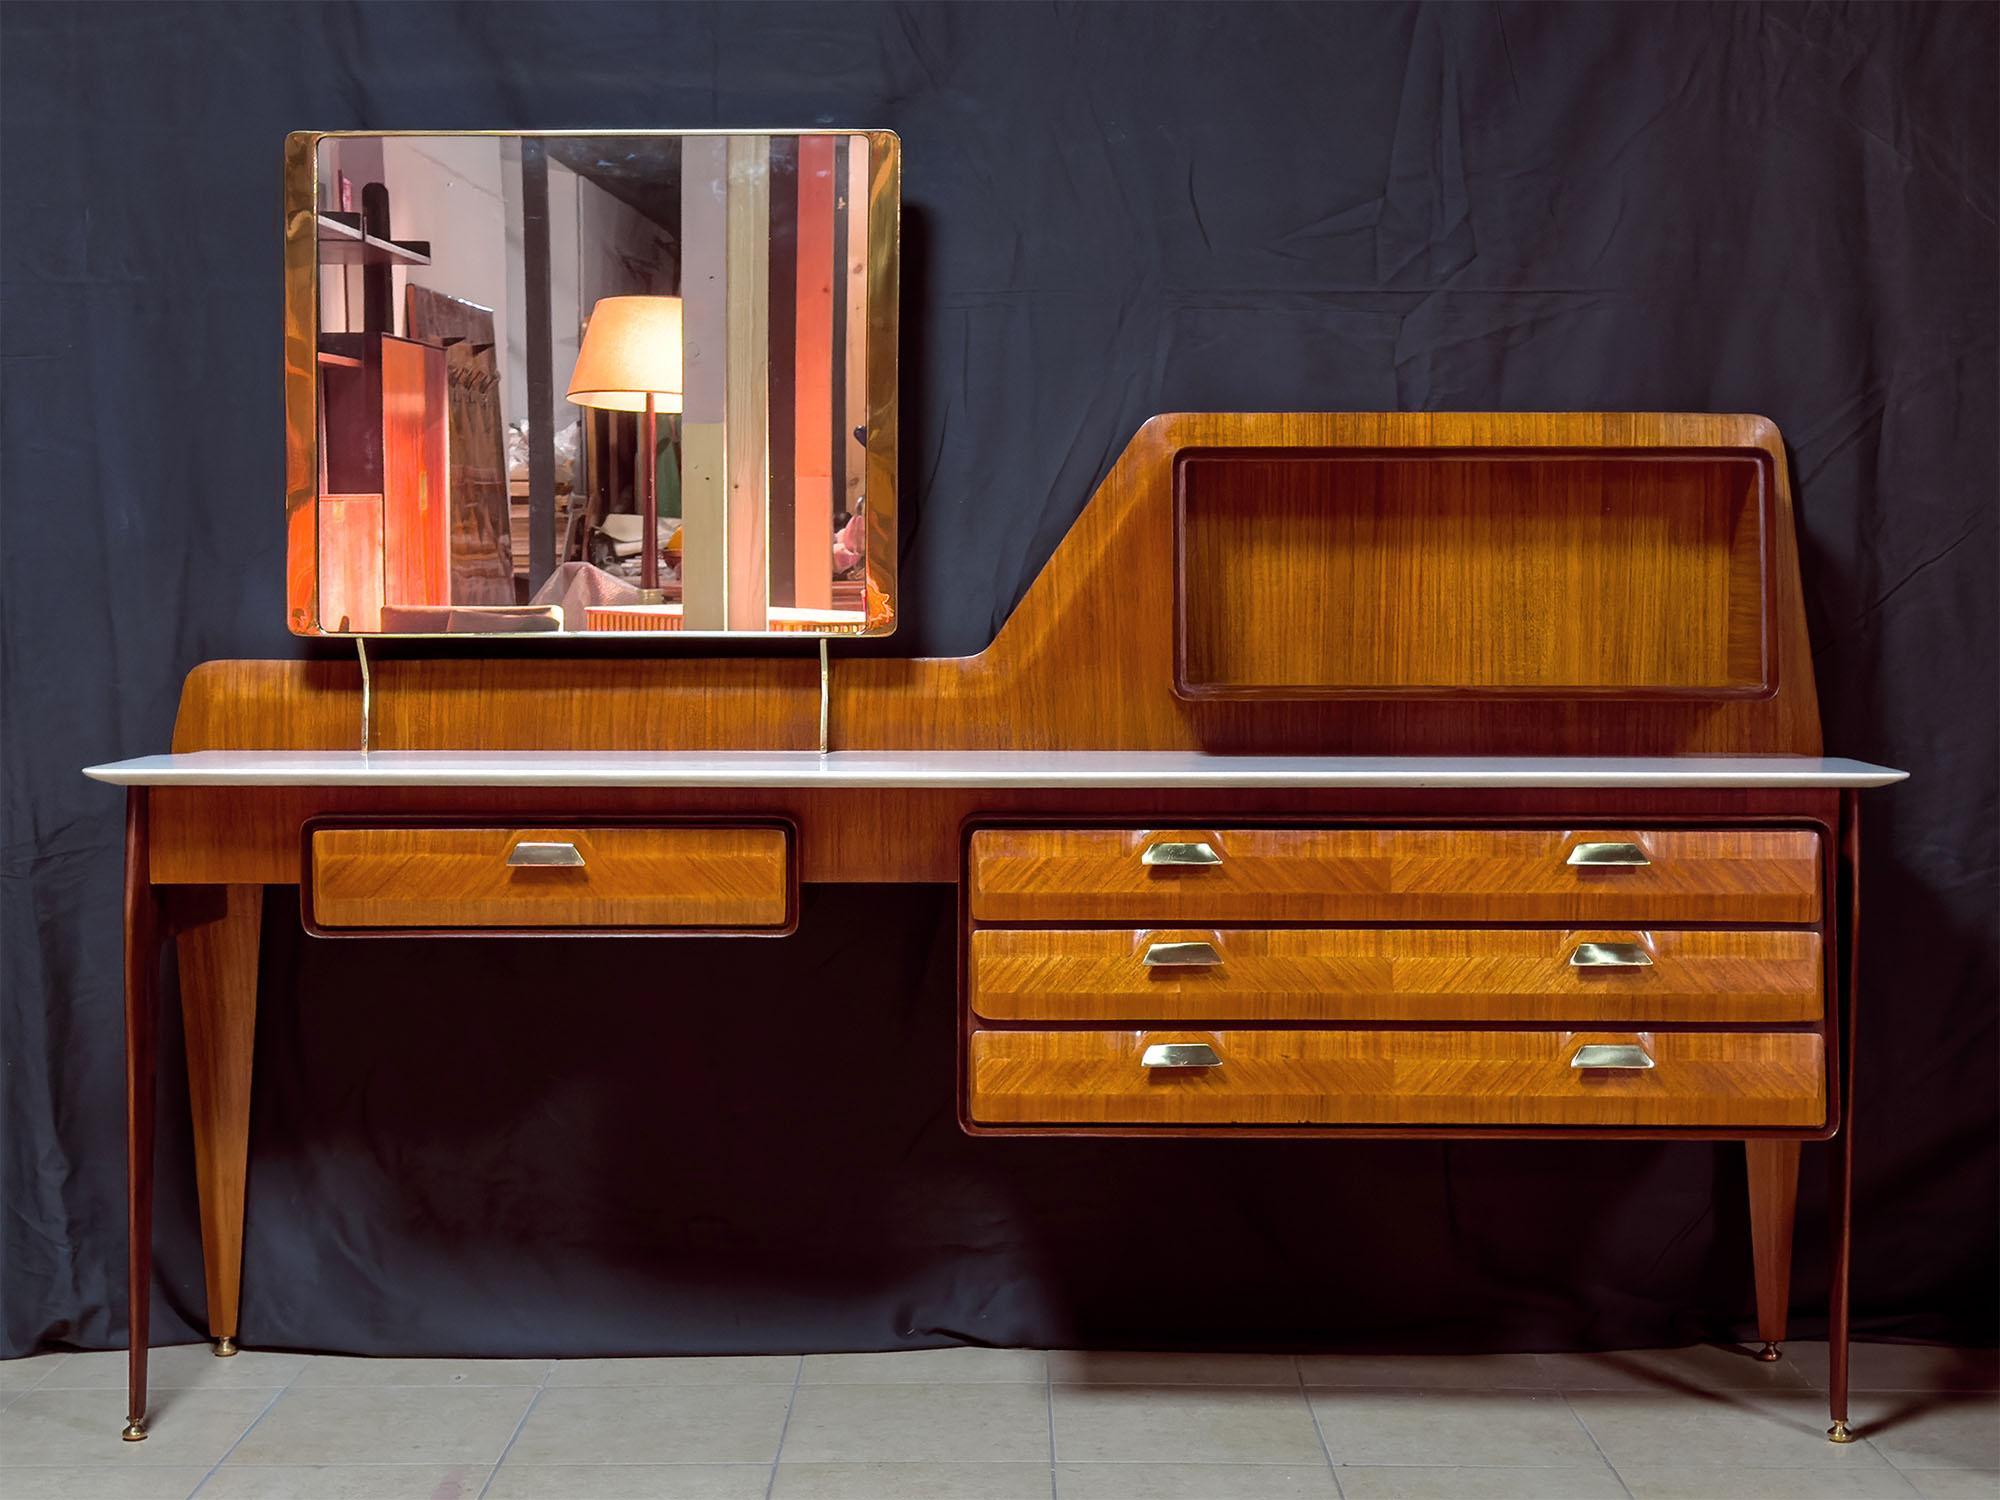 Stunning teakwood Sideboard and/or Vanity Dresser manufactured by La Permanente Mobili Cantù in the 1950s.

Its aesthetic uniqueness is given by the original soft sculptural shape design of the structure and its lateral tapered legs finished with